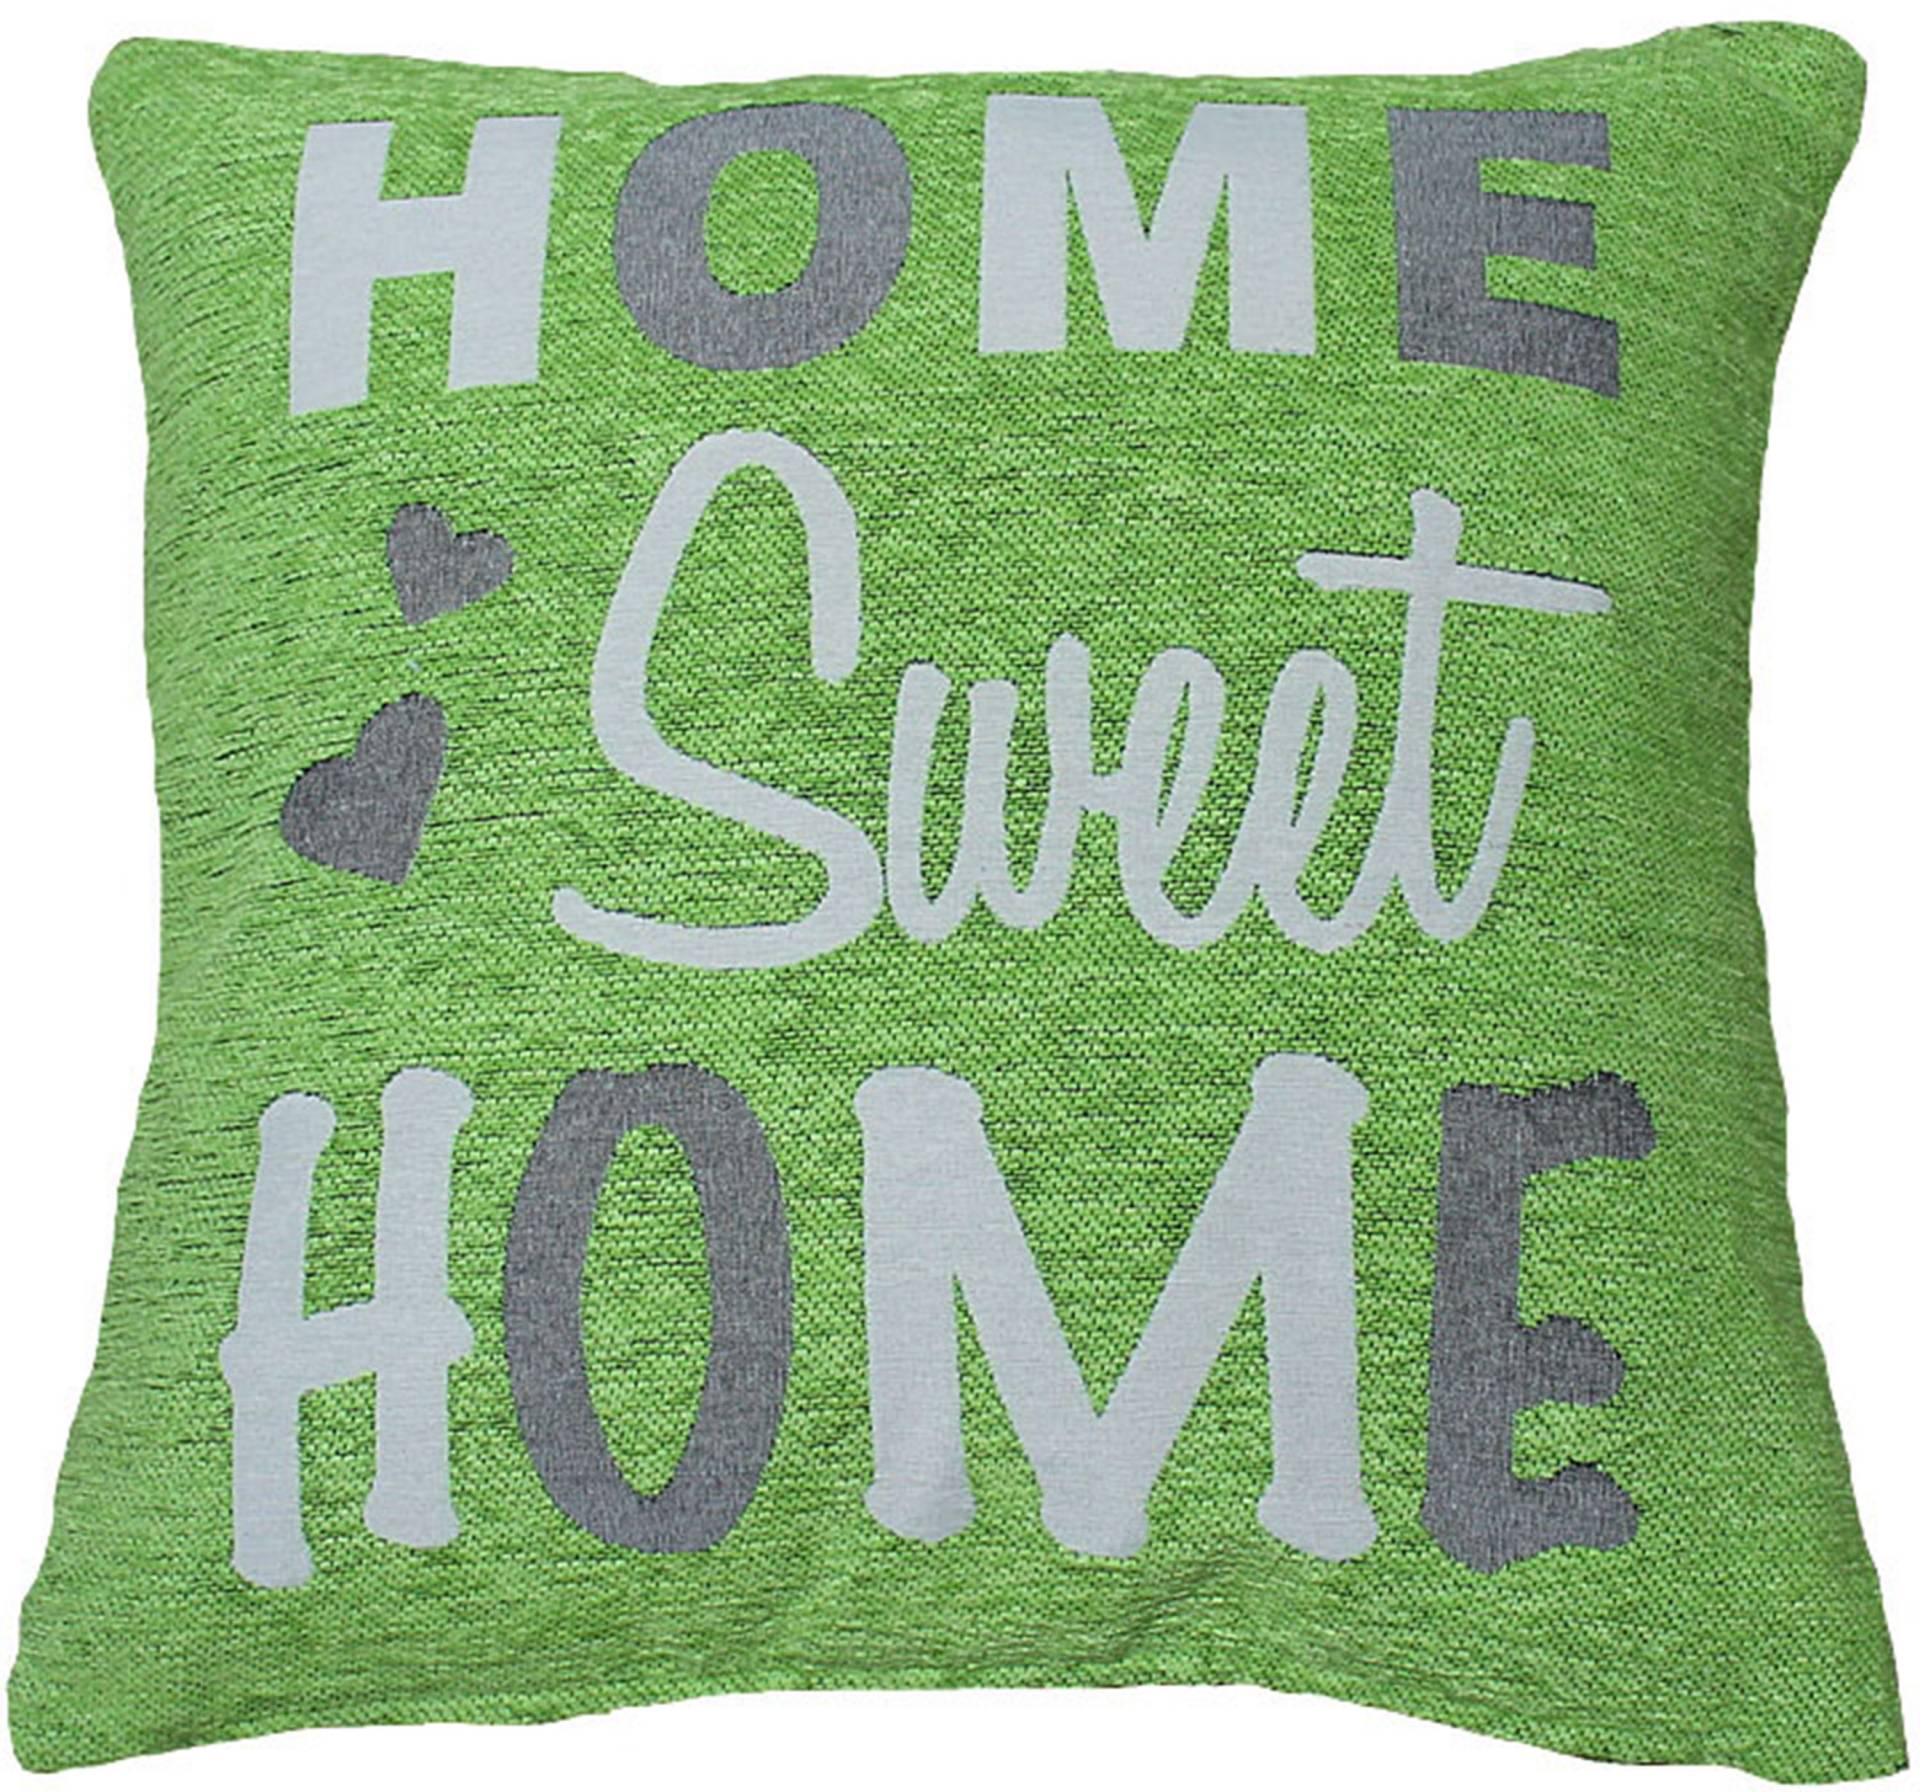 HOSSNER - HOMECOLLECTION Kissenhülle »Home Sweet Home«, (2 St.) von HOSSNER - HOMECOLLECTION